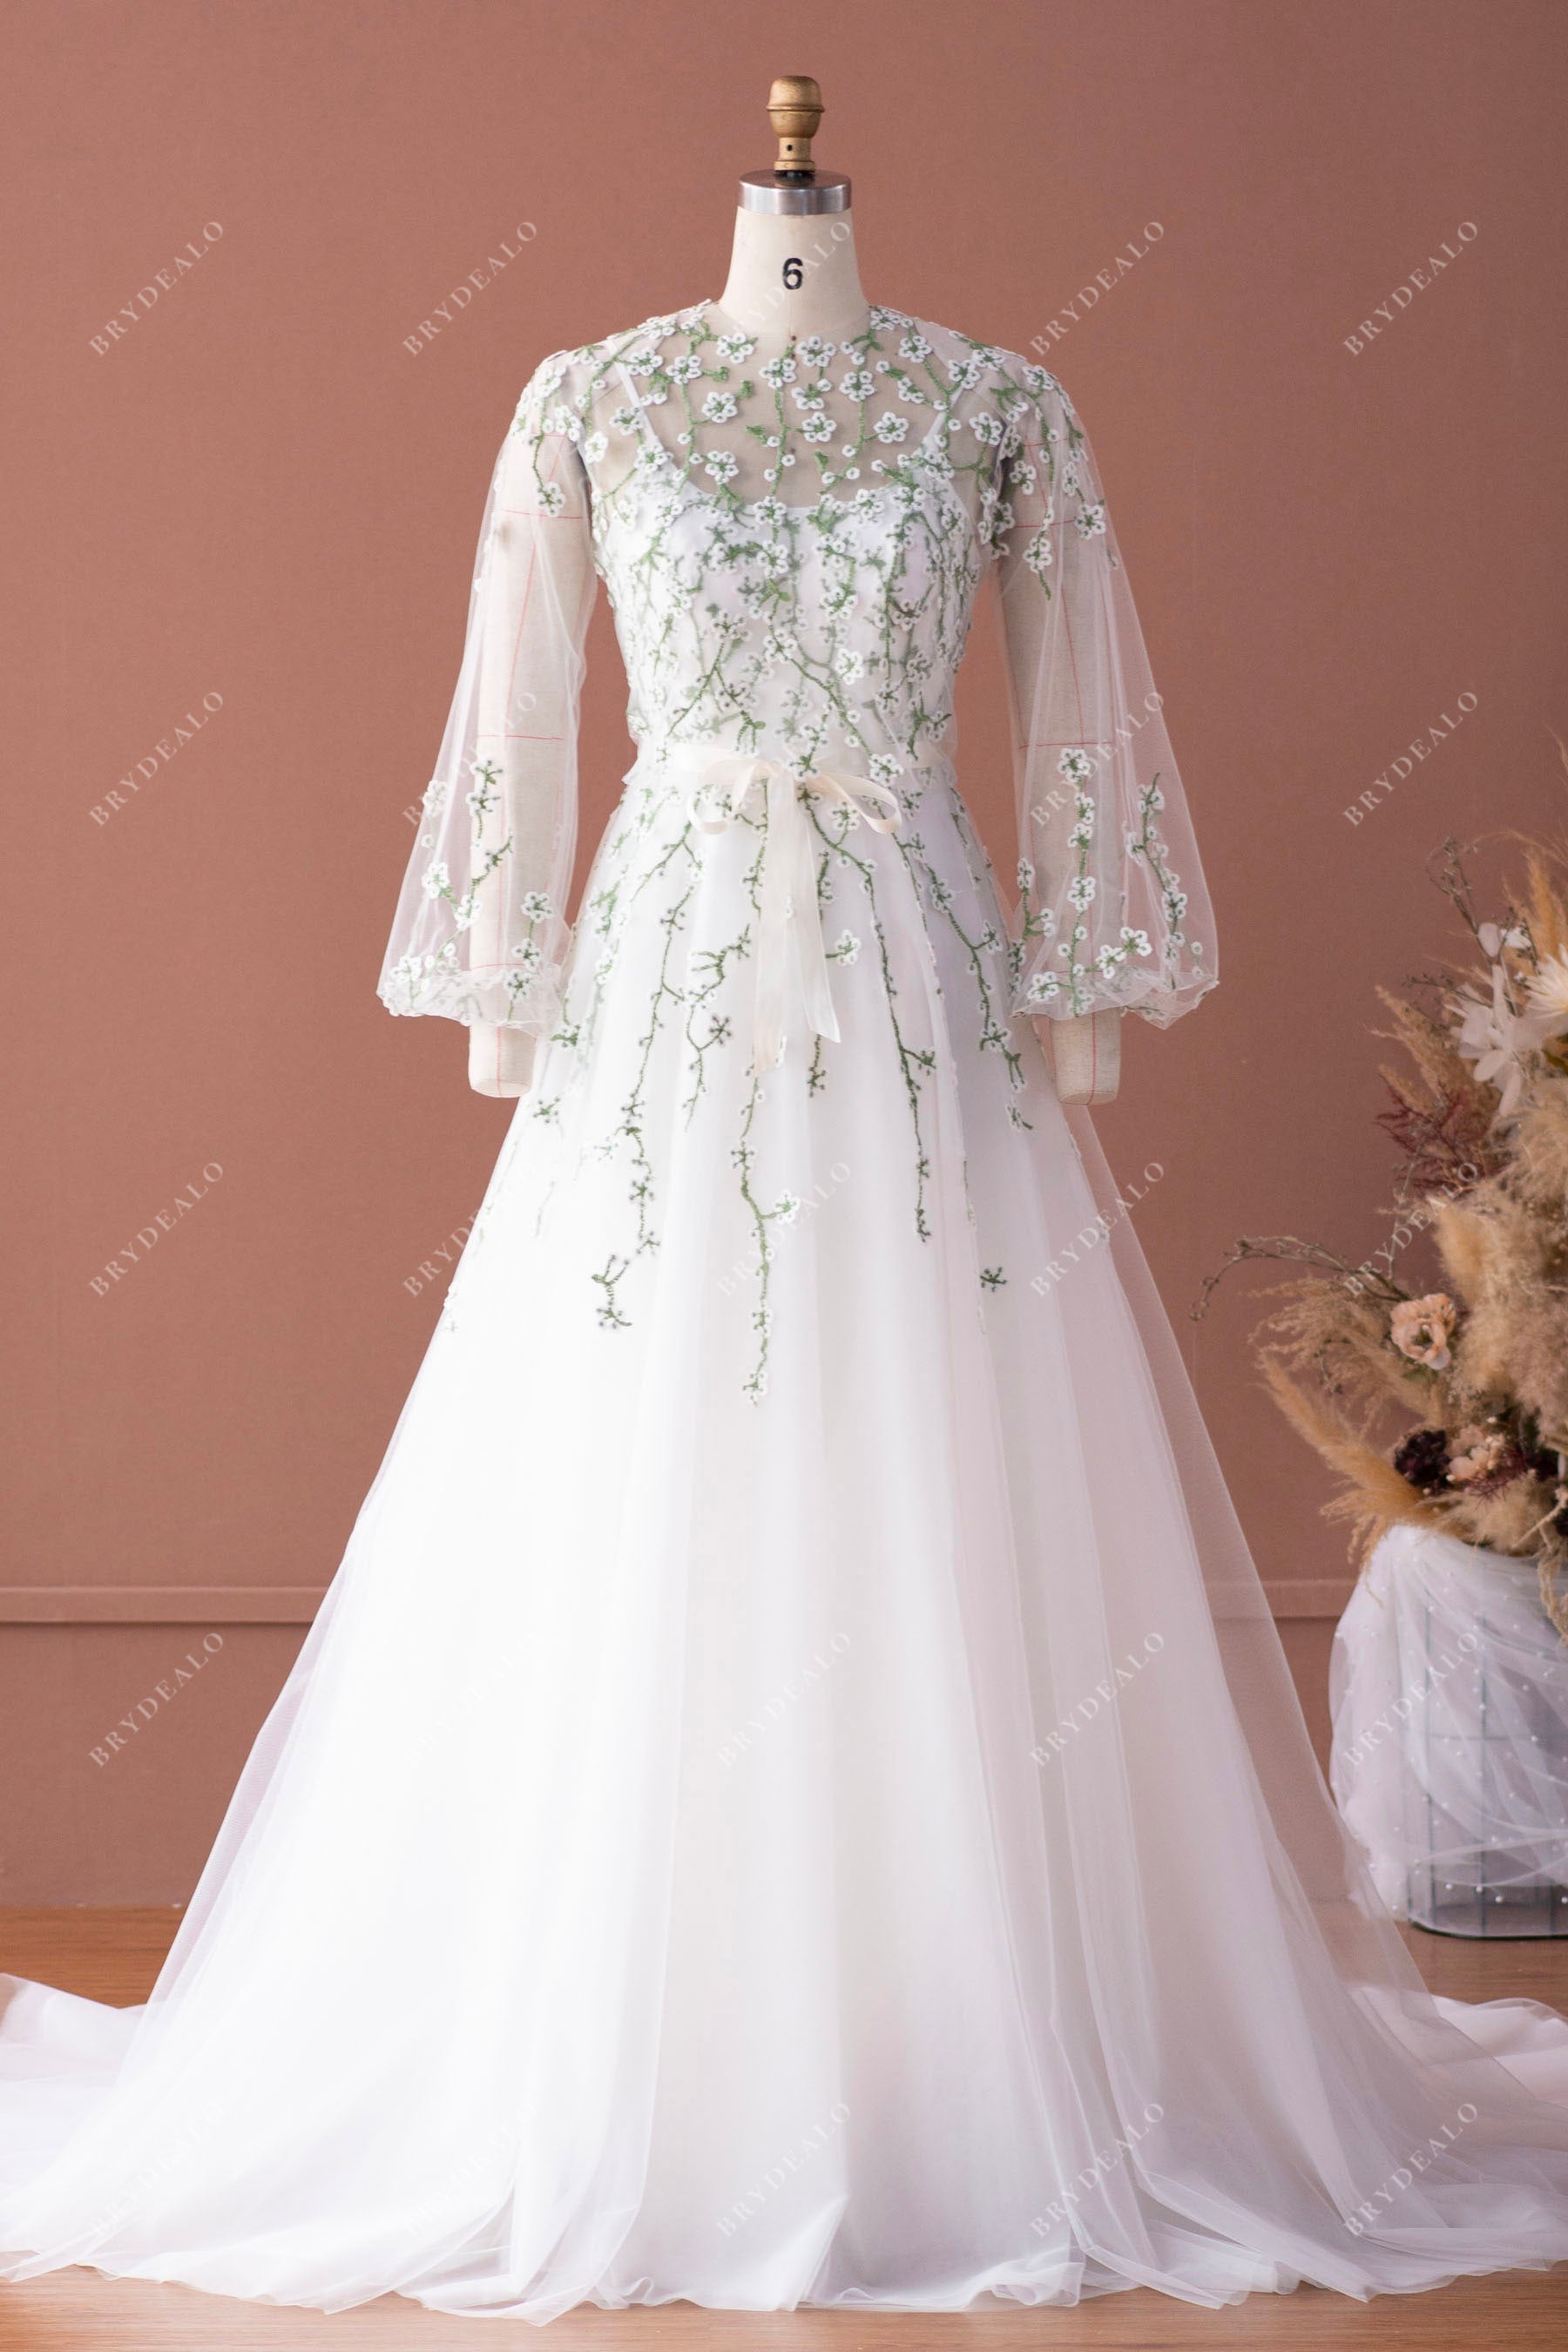 Rustic Lace Bubble Sleeve Blouse Ball Gown Wedding Dress